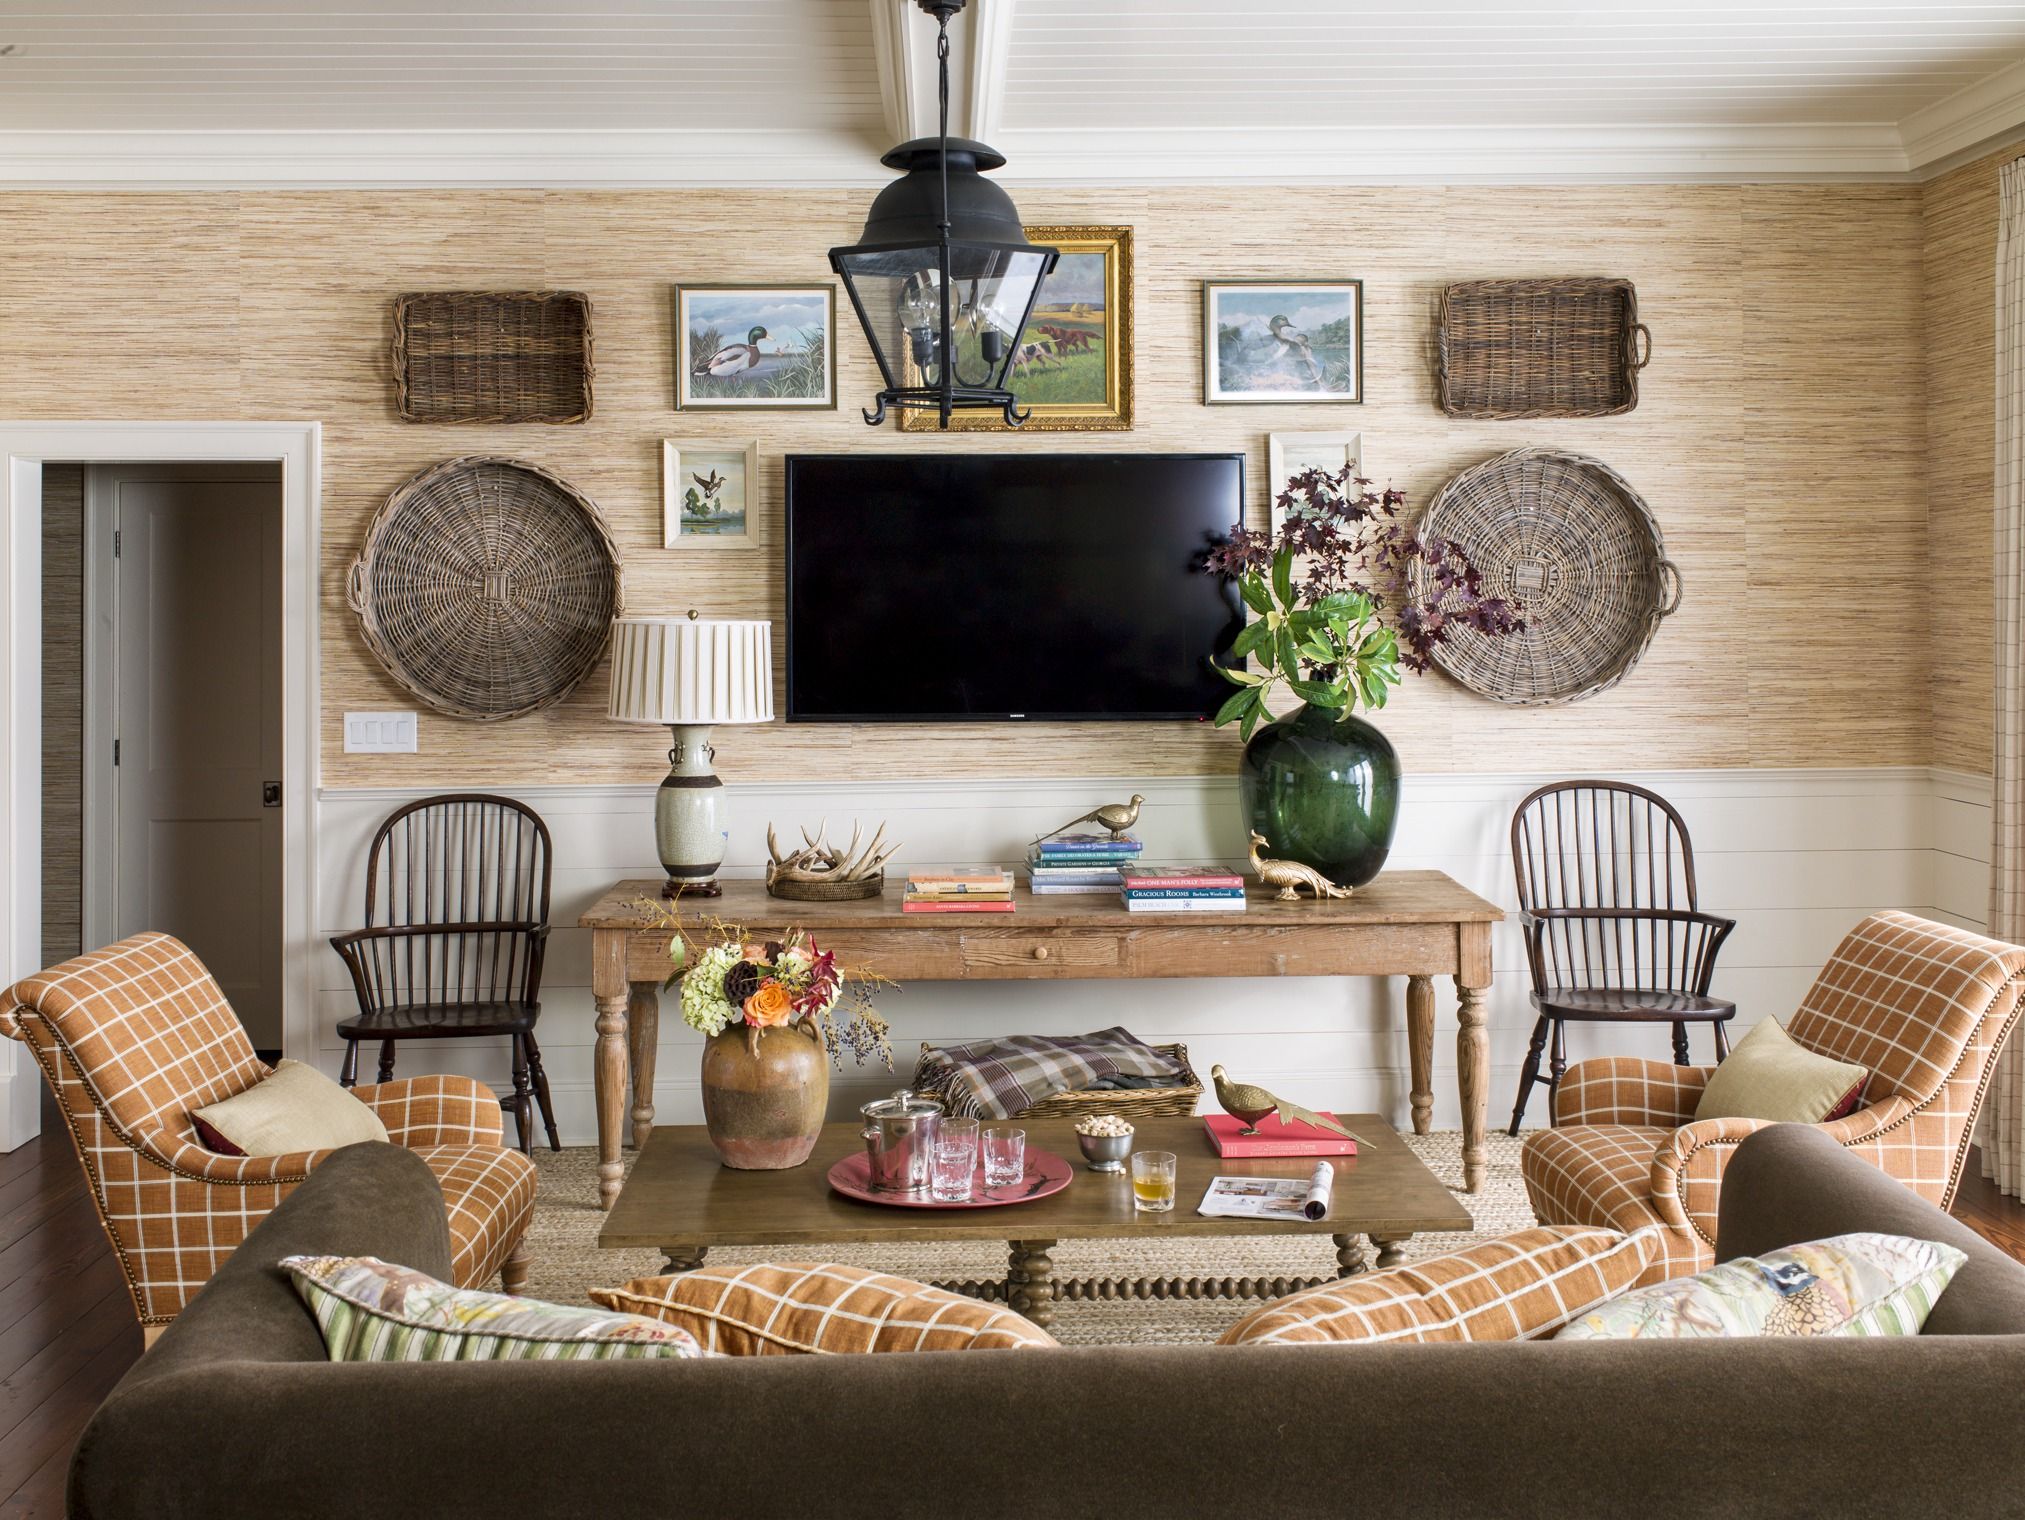 20 Rustic Living Room Ideas   Modern Rustic Living Room Decor and ...